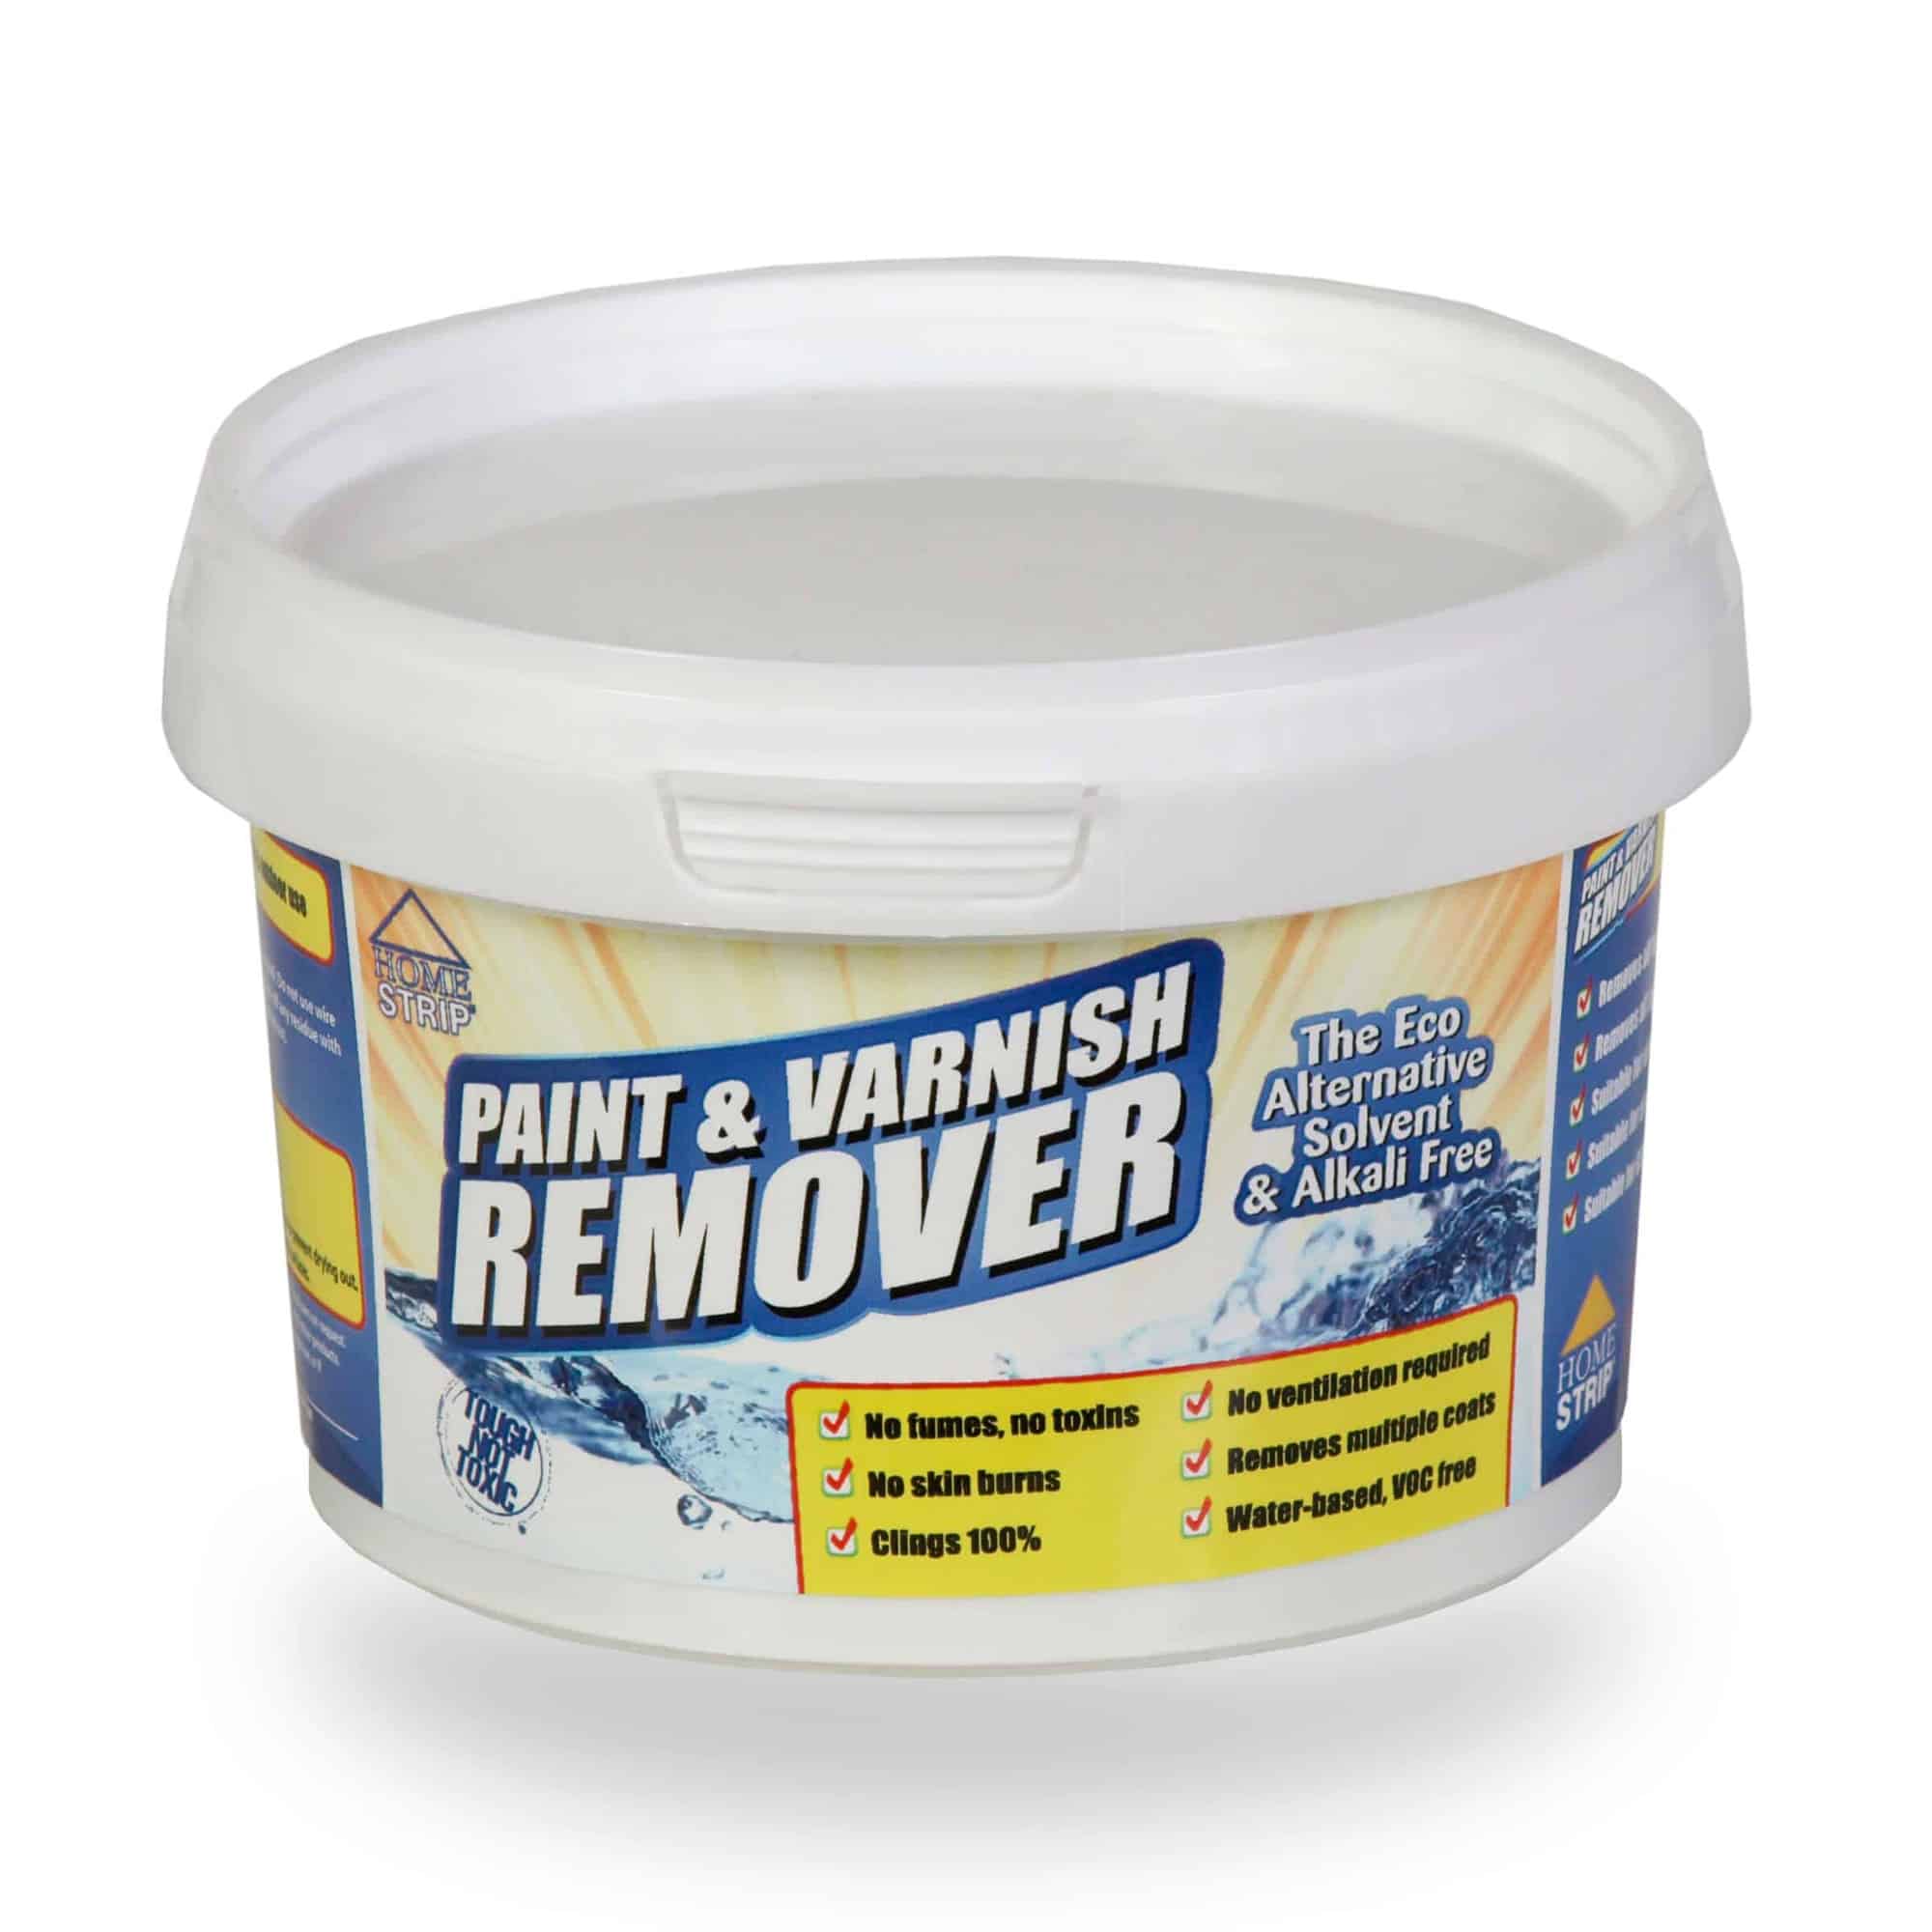 Soot remover and Fireplace cleaner